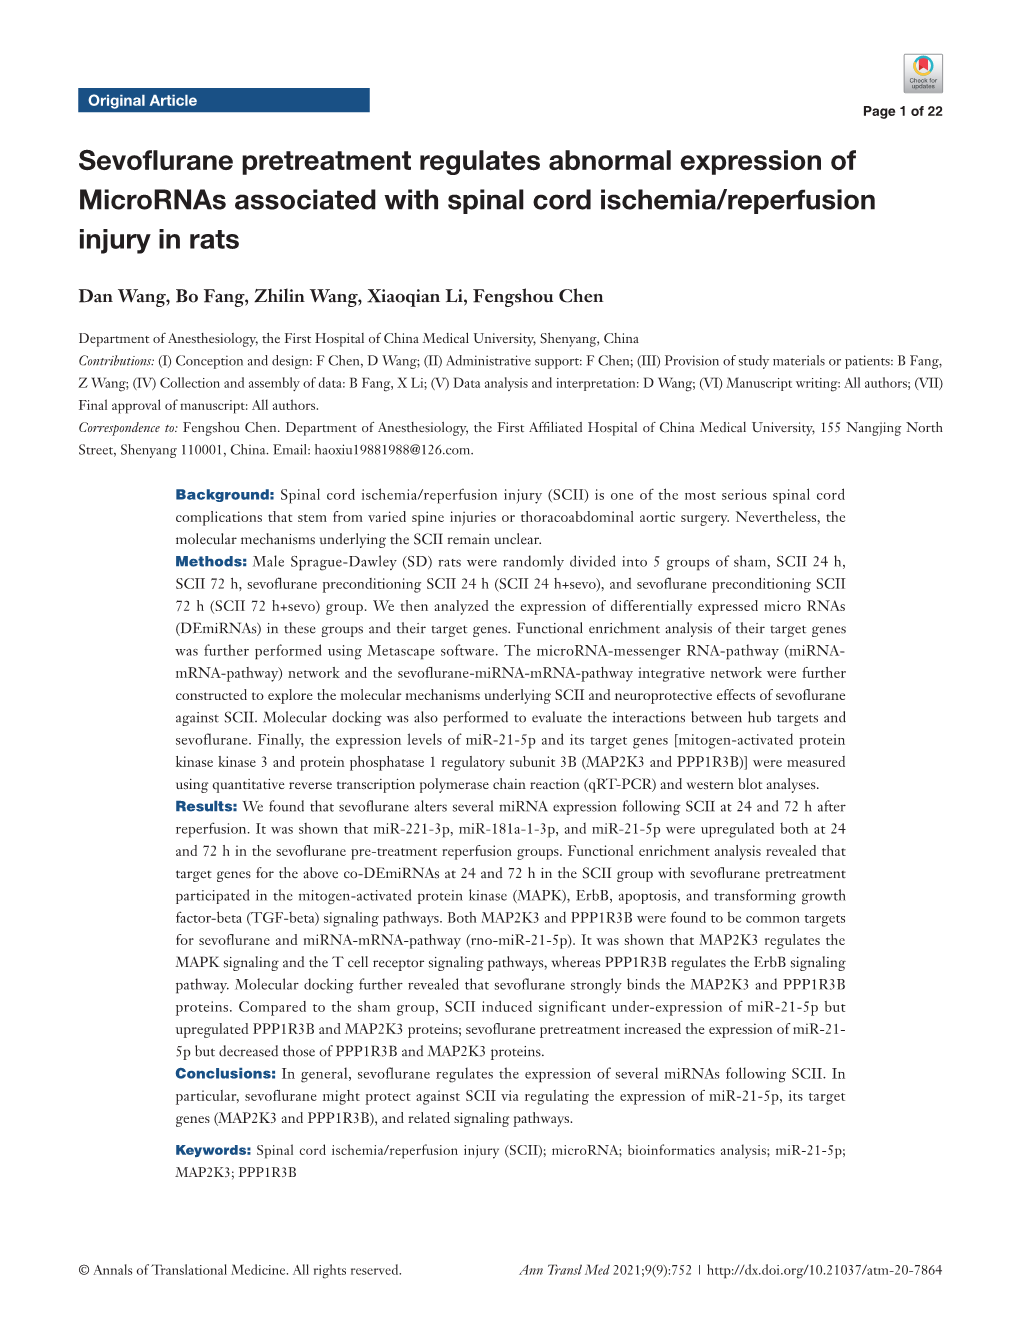 Sevoflurane Pretreatment Regulates Abnormal Expression of Micrornas Associated with Spinal Cord Ischemia/Reperfusion Injury in Rats